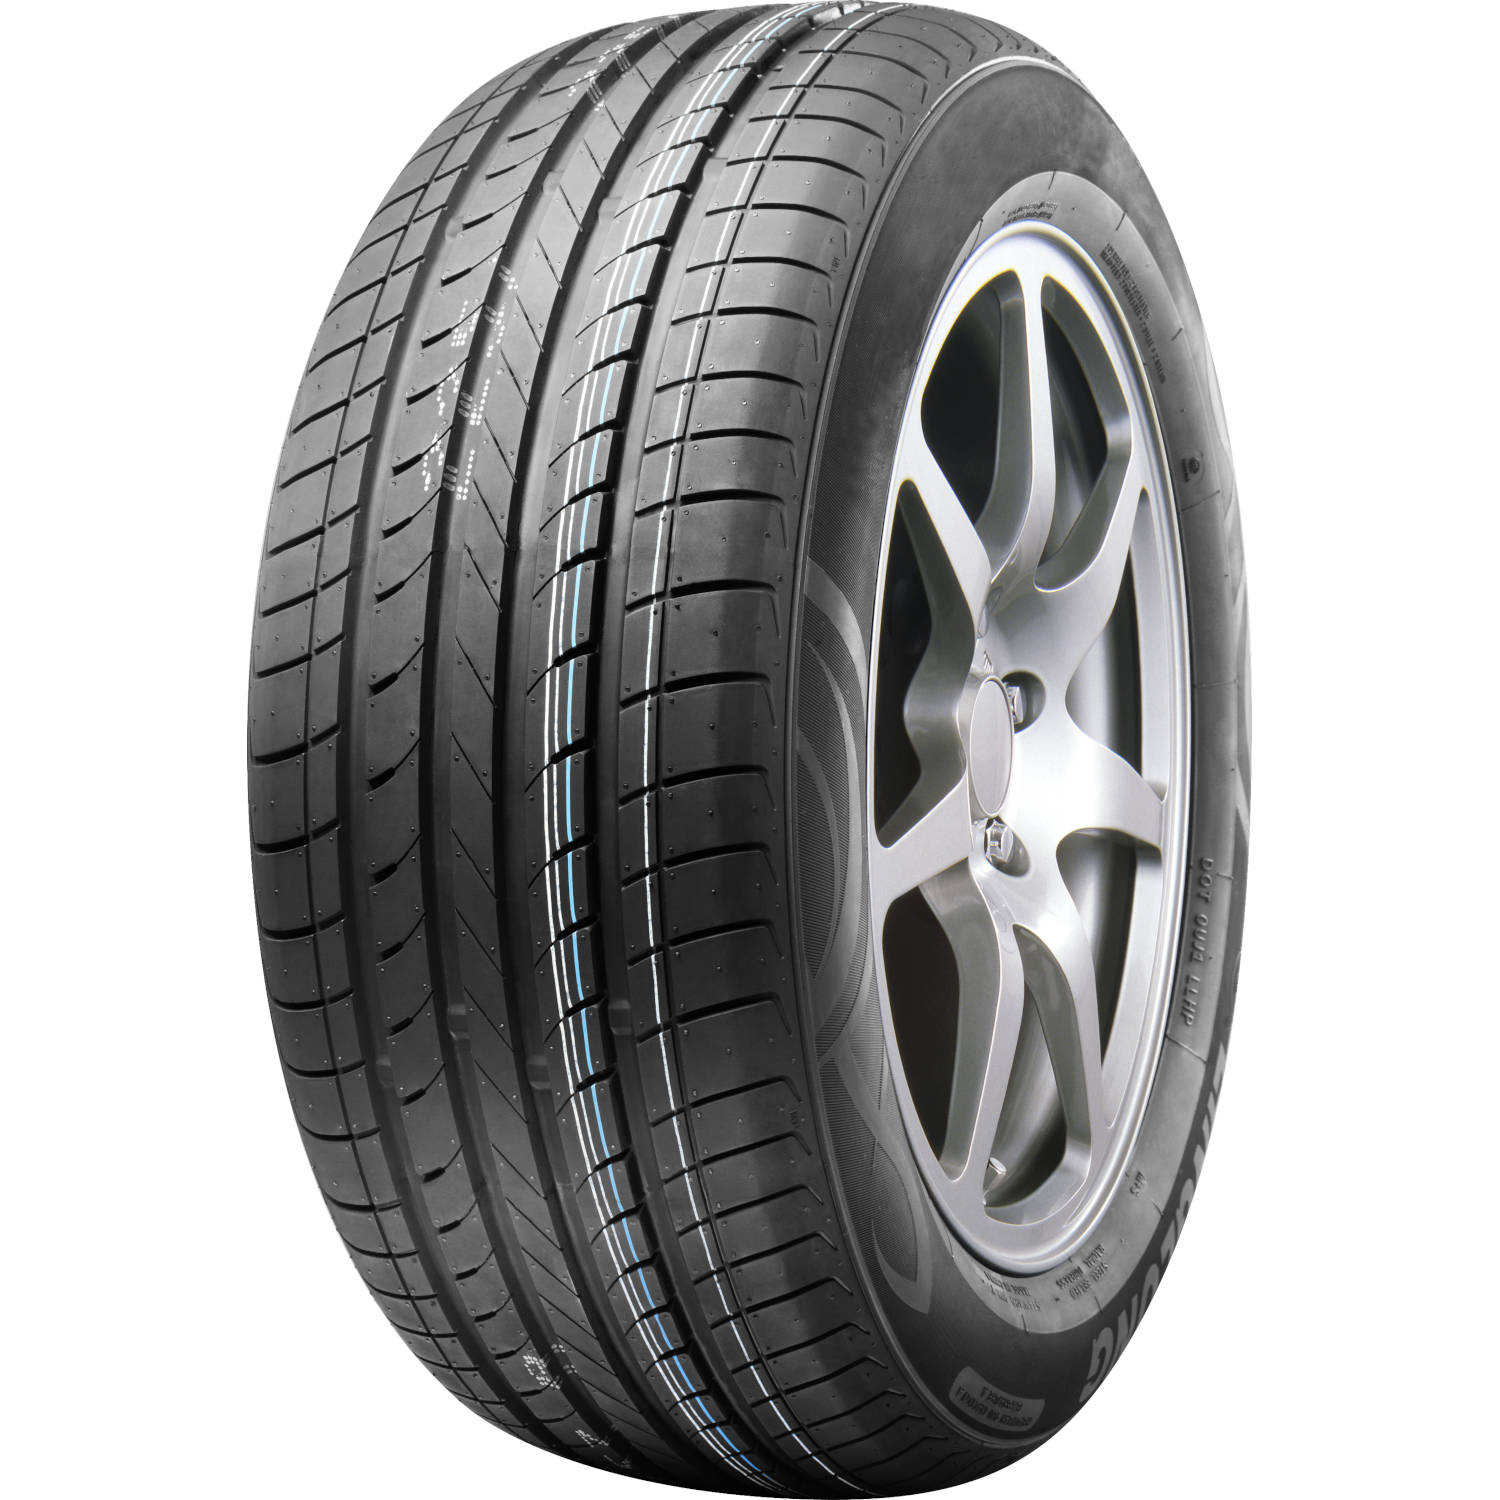 ROAD ONE CAVALRY HP 195/55R15 (23.4X7.7R 15) Tires